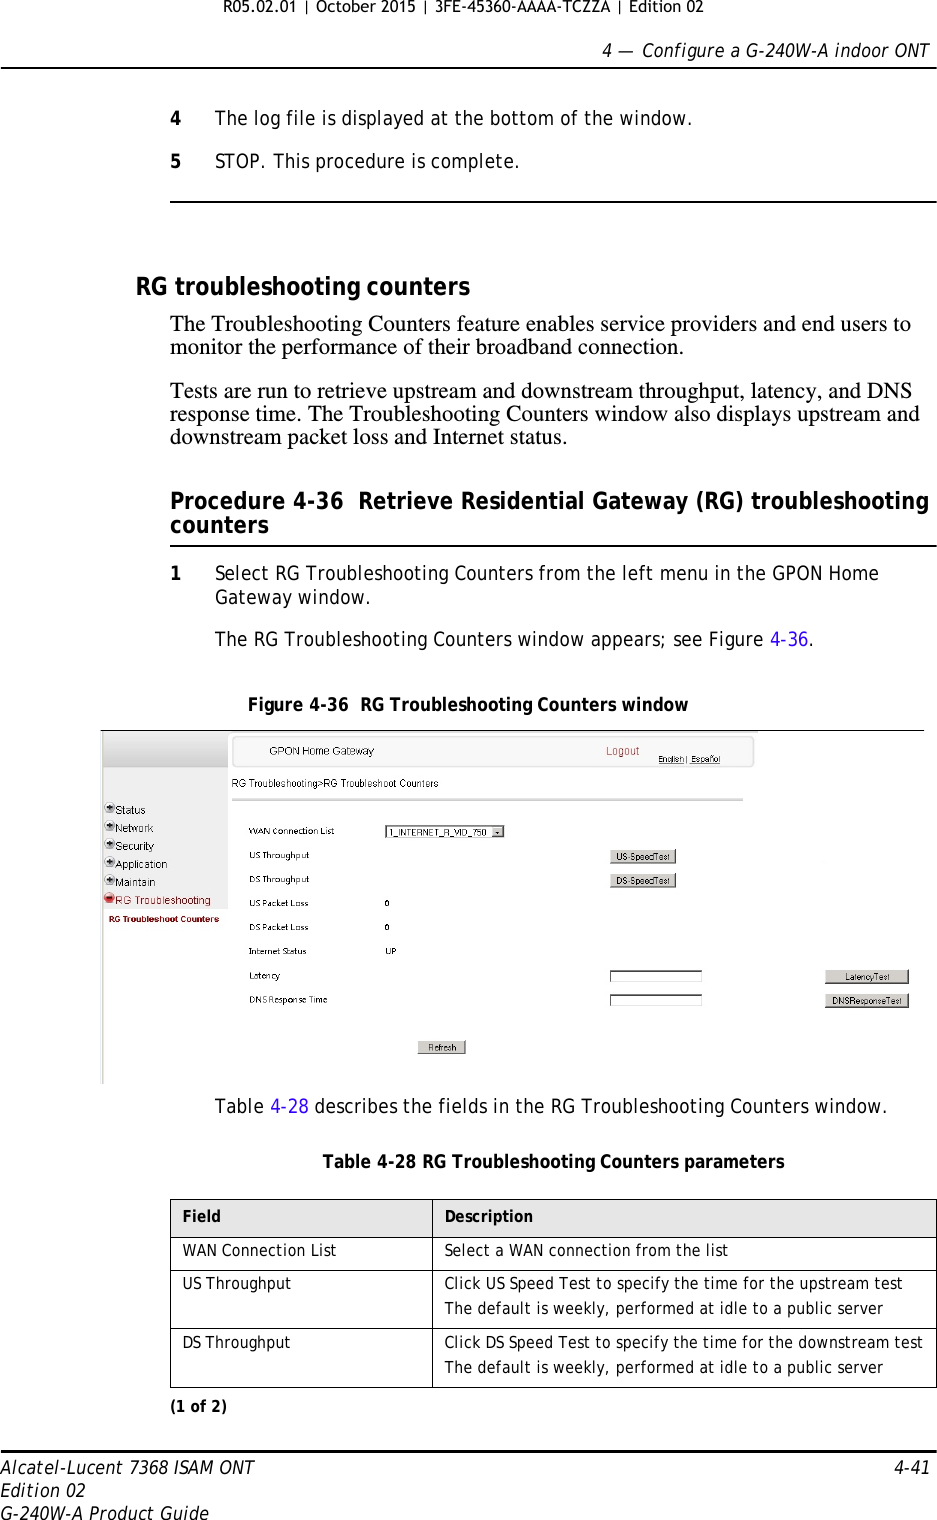 4 —  Configure a G-240W-A indoor ONTAlcatel-Lucent 7368 ISAM ONT 4-41Edition 02G-240W-A Product Guide4The log file is displayed at the bottom of the window.5STOP. This procedure is complete.RG troubleshooting countersThe Troubleshooting Counters feature enables service providers and end users to monitor the performance of their broadband connection.Tests are run to retrieve upstream and downstream throughput, latency, and DNS response time. The Troubleshooting Counters window also displays upstream and downstream packet loss and Internet status.Procedure 4-36  Retrieve Residential Gateway (RG) troubleshooting counters1Select RG Troubleshooting Counters from the left menu in the GPON Home Gateway window.The RG Troubleshooting Counters window appears; see Figure 4-36. Figure 4-36  RG Troubleshooting Counters windowTable 4-28 describes the fields in the RG Troubleshooting Counters window.Table 4-28 RG Troubleshooting Counters parametersField DescriptionWAN Connection List Select a WAN connection from the listUS Throughput Click US Speed Test to specify the time for the upstream testThe default is weekly, performed at idle to a public serverDS Throughput Click DS Speed Test to specify the time for the downstream testThe default is weekly, performed at idle to a public server(1 of 2) R05.02.01 | October 2015 | 3FE-45360-AAAA-TCZZA | Edition 02 